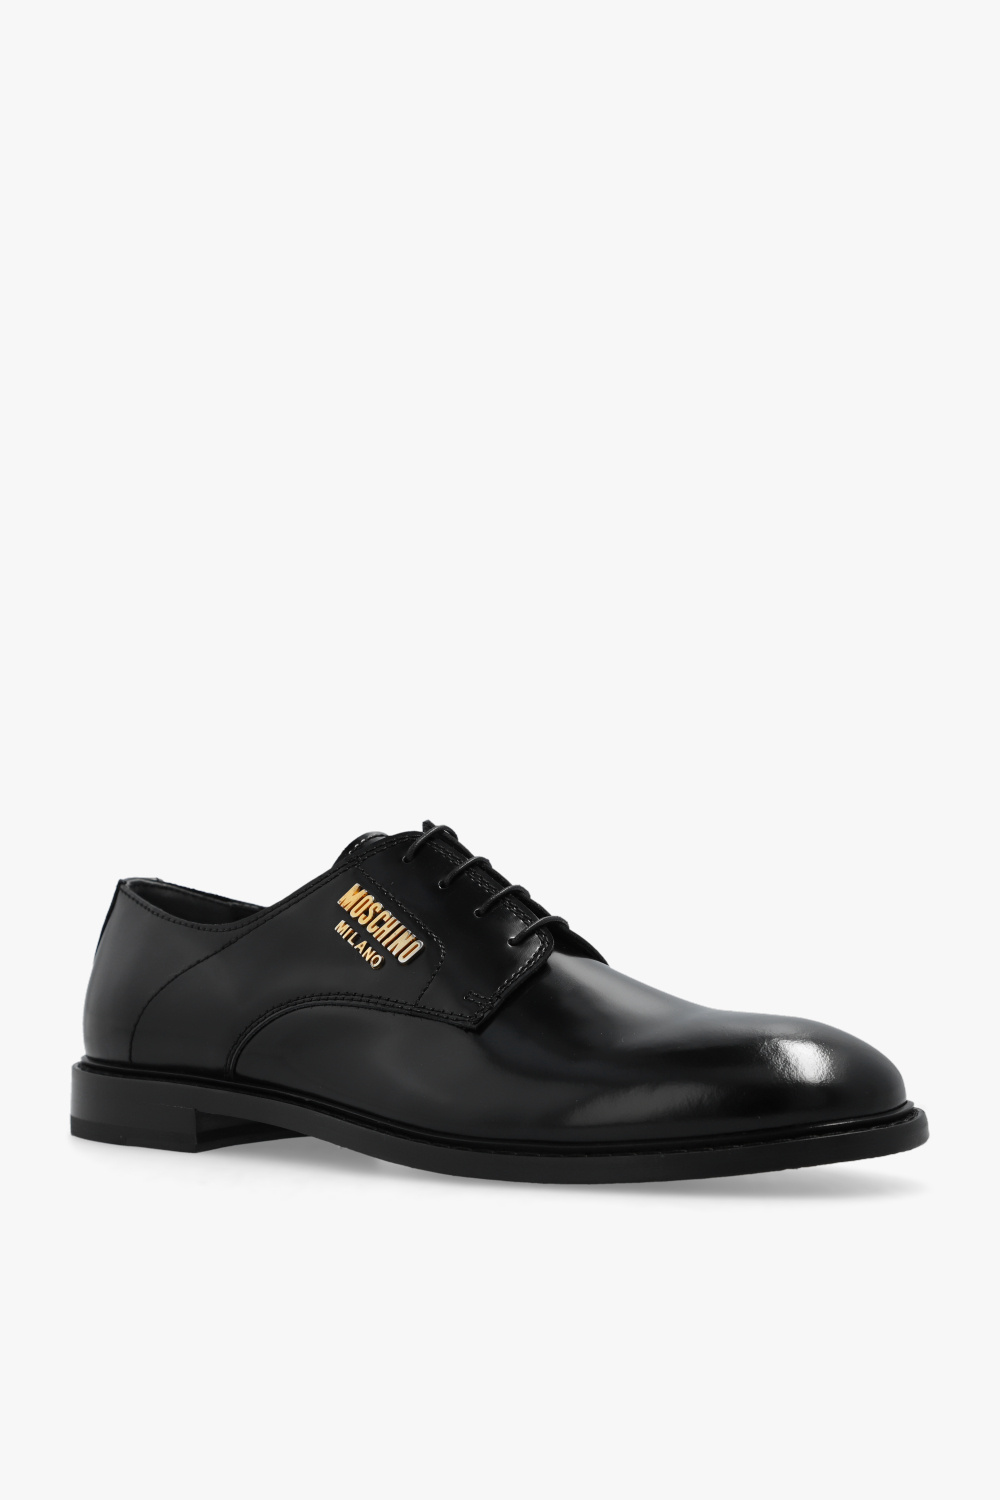 Moschino Leather Derby Kay shoes